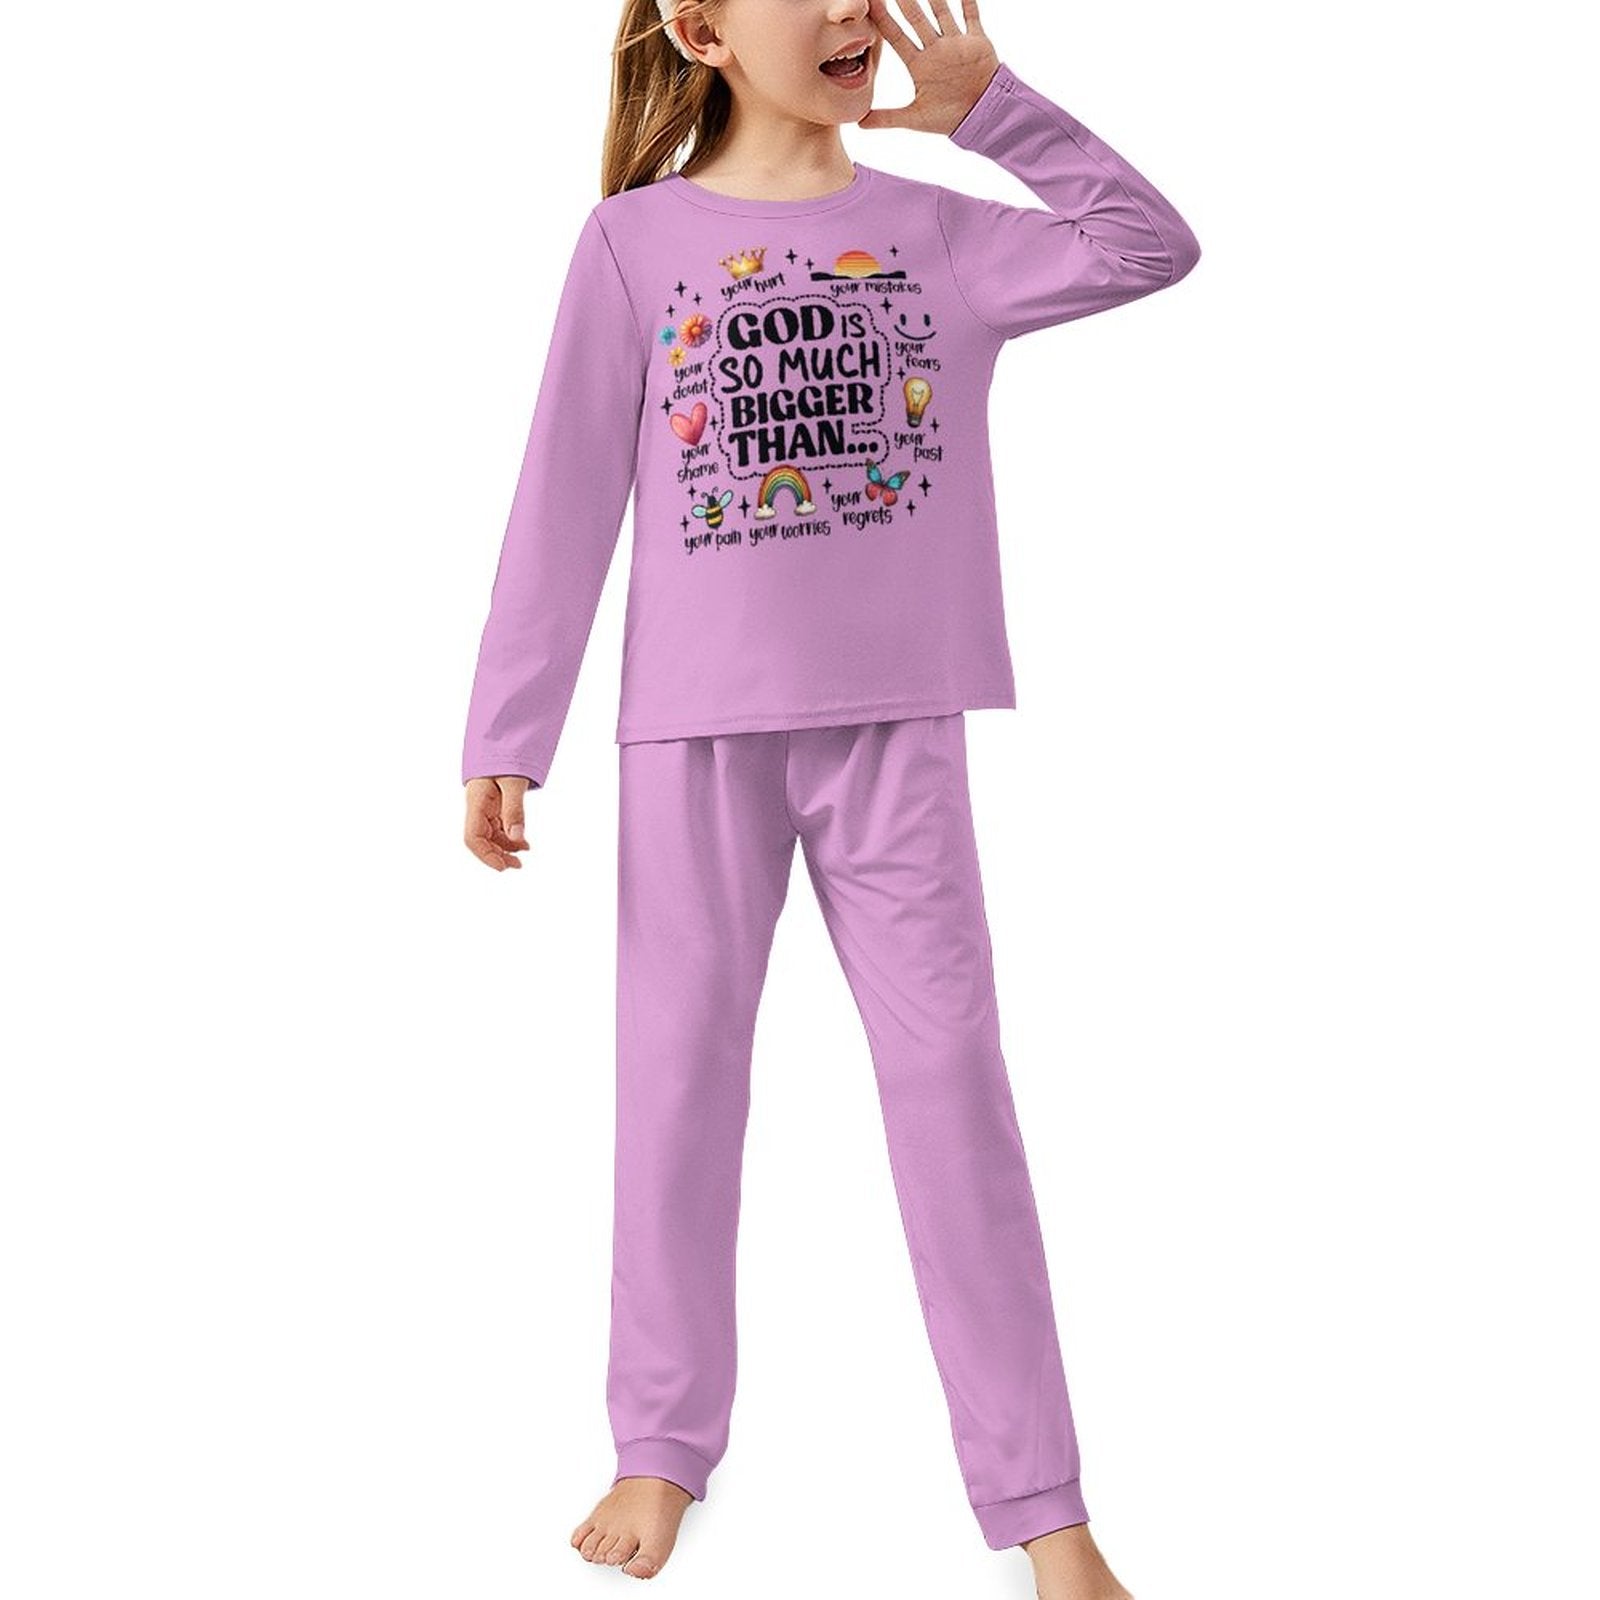 God Is So Much Bigger Than Youth Toddler Christian  Long Sleeve Girls Pajama Set SALE-Personal Design